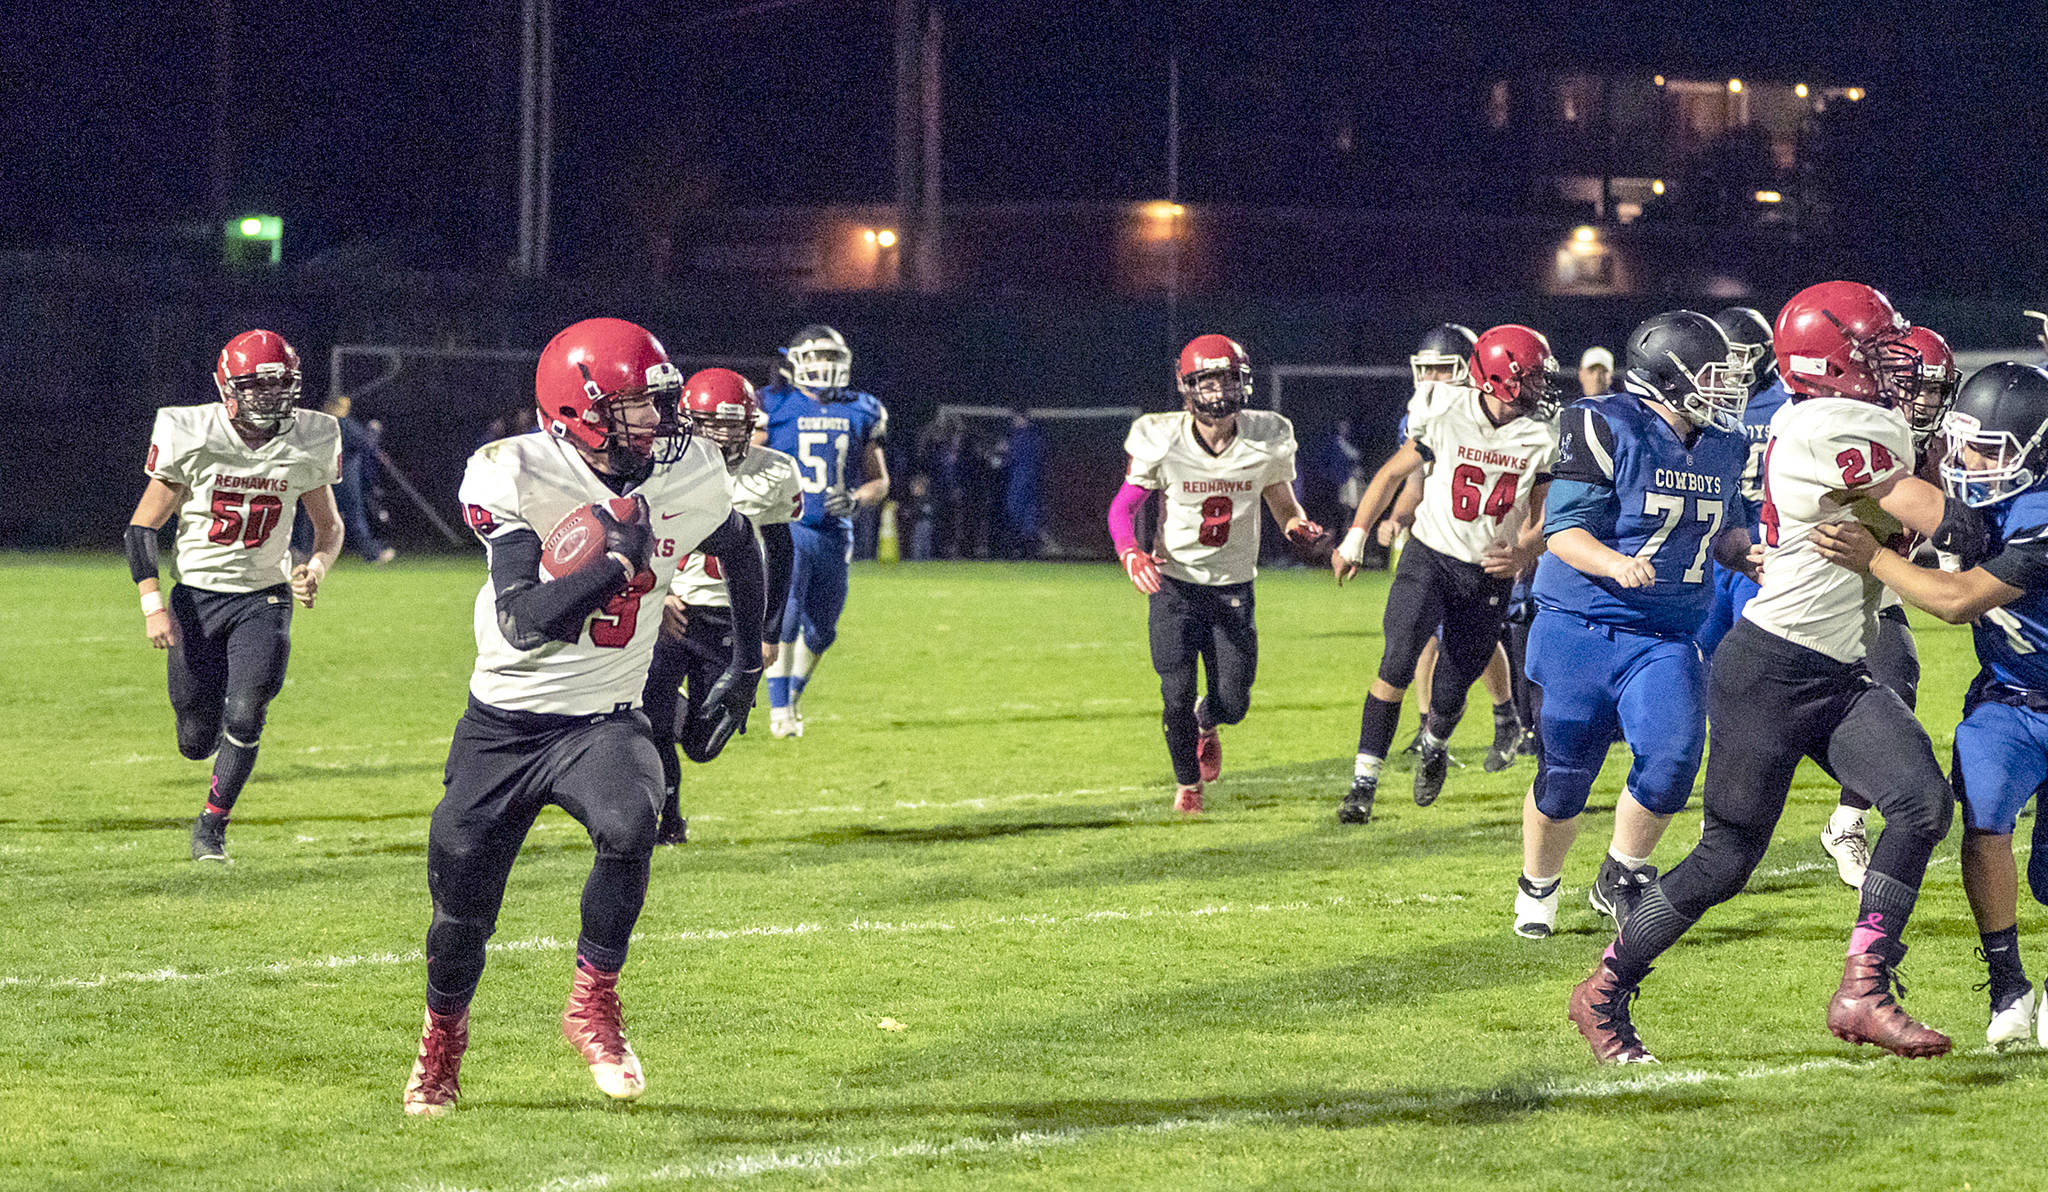 &lt;strong&gt;Steve Mullensky&lt;/strong&gt;/for Peninsula Daily News                                The Redhawk offense clears a path for Cole Crawford to gain yardage for a first down during a game against Chimacum on Friday in Memorial Field.